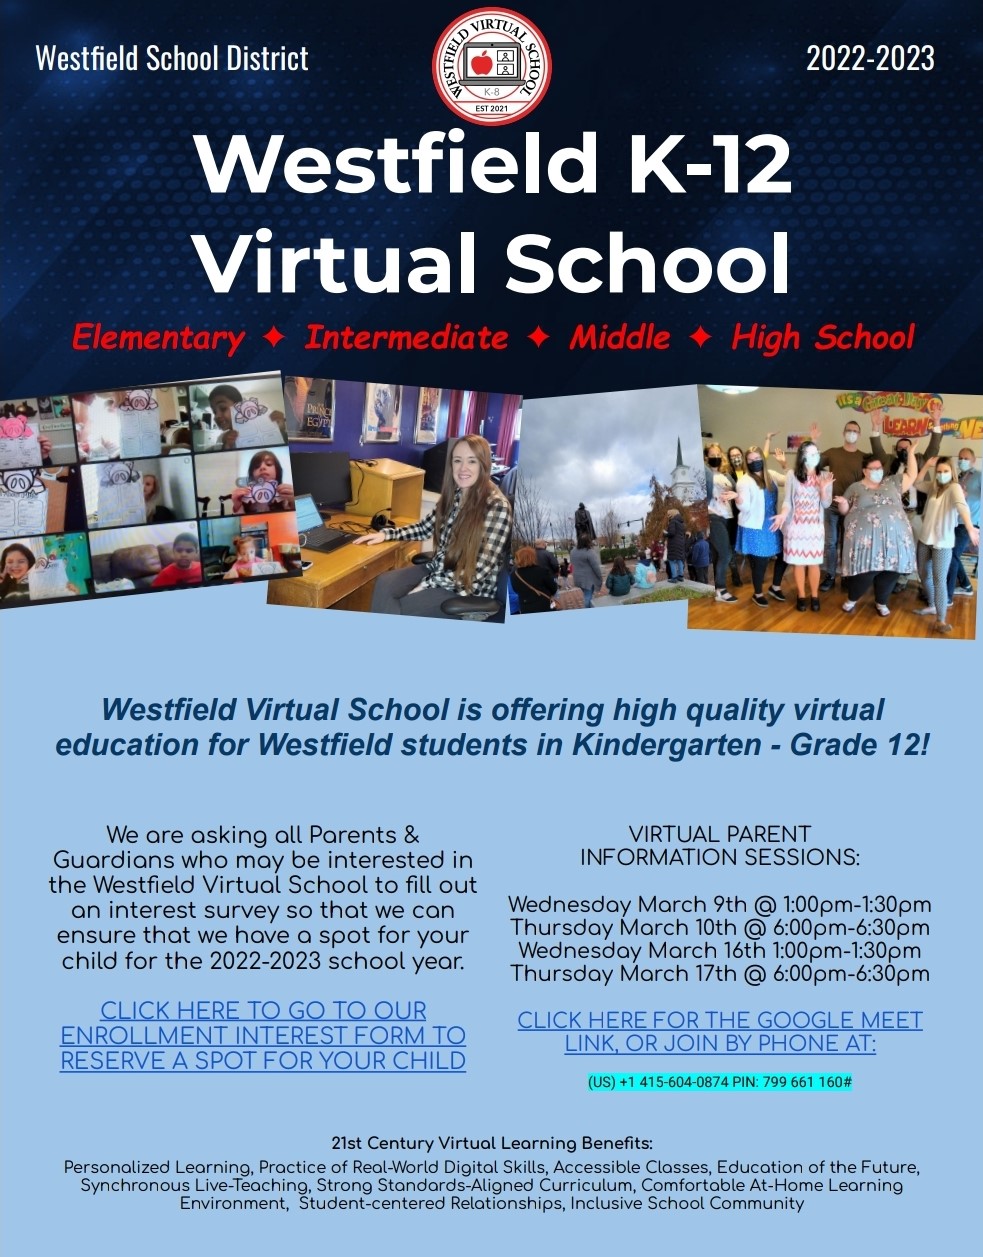 Flyer Reads: Westfield K-12 Virtual School 2022-2023. Elementary, Intermediate, Middle, High School. Links to Enrollment Interest Survey and Parent Info session offerings.